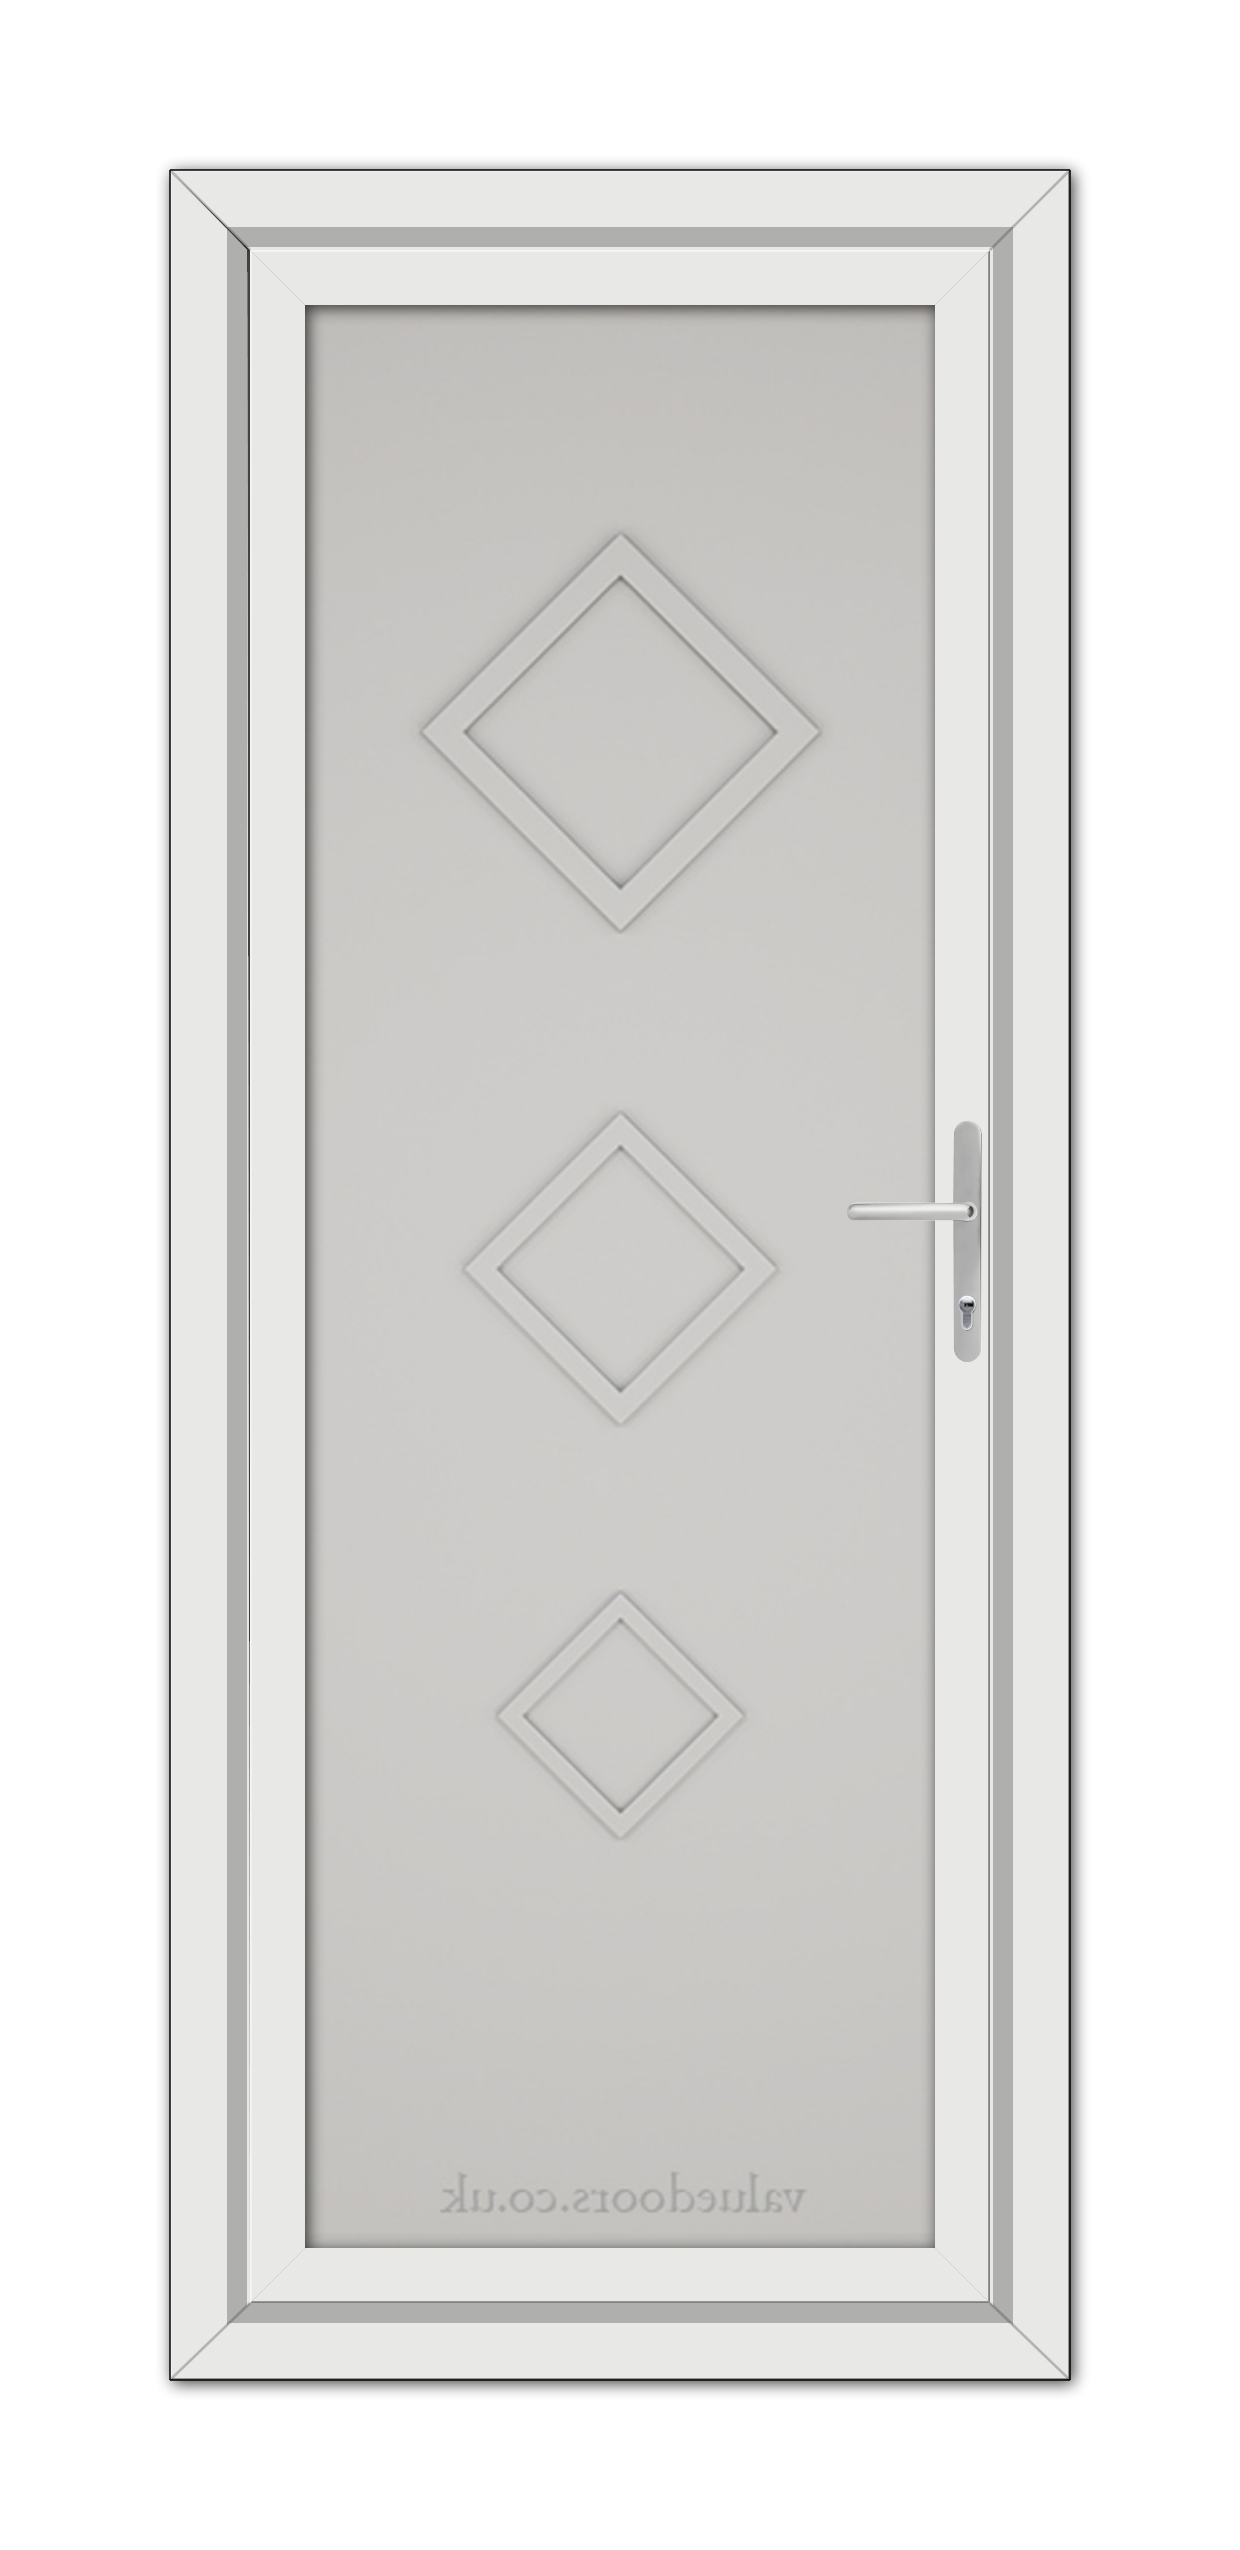 A vertical image of a Silver Grey Modern 5123 Solid uPVC door featuring three diamond-shaped panels and a metallic handle, set in a simple frame.